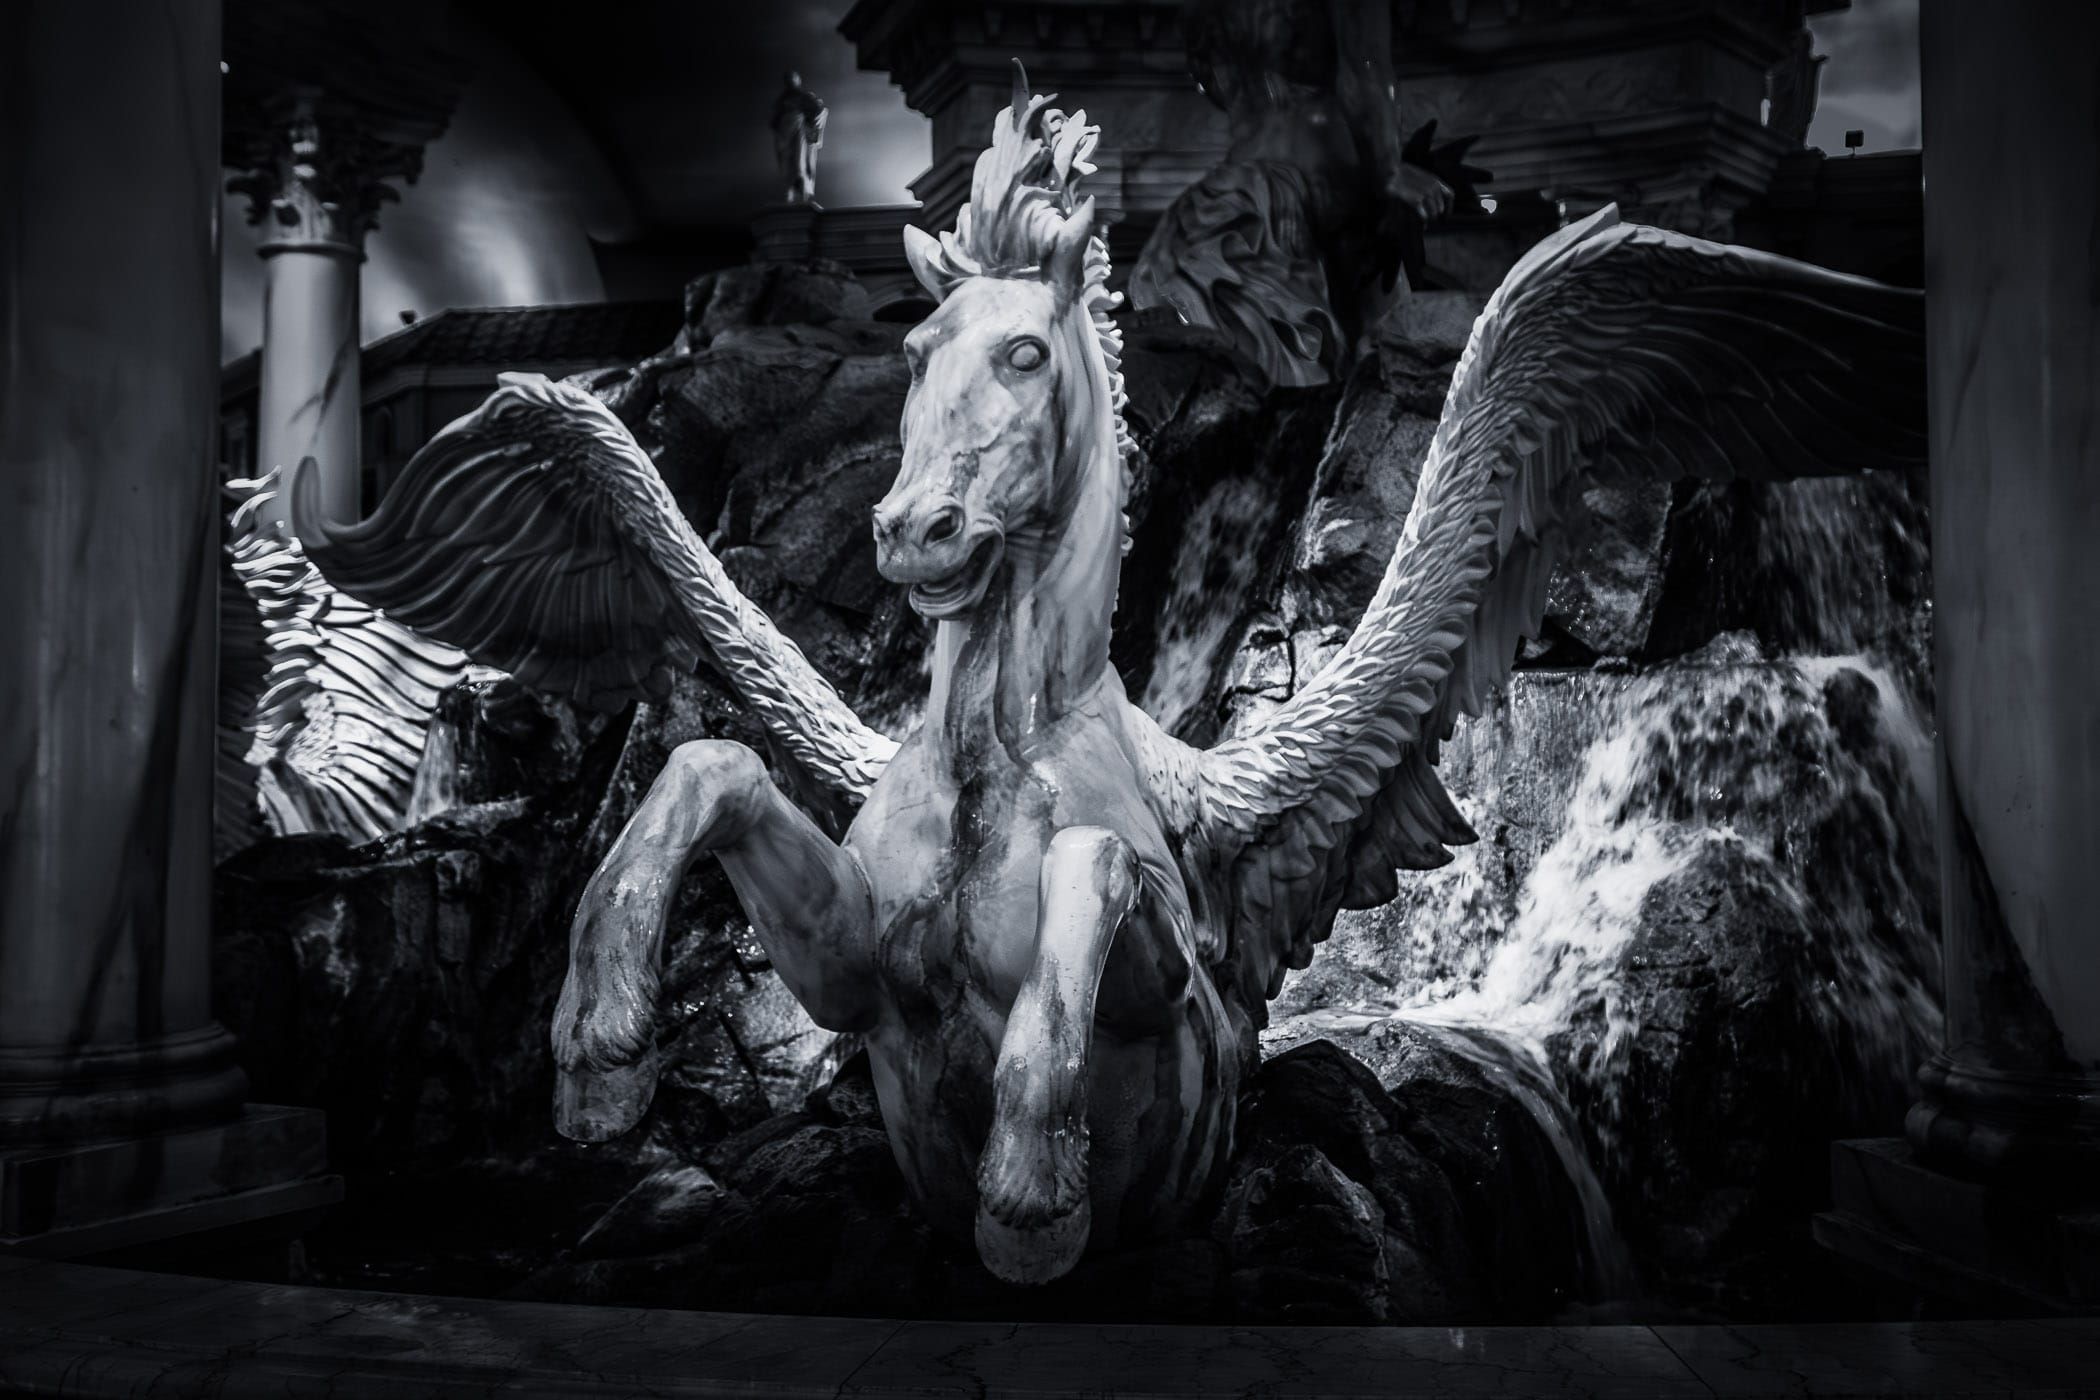 A statue of Pegasus in a fountain found in the Forum Shops at Caesars Palace, Las Vegas.